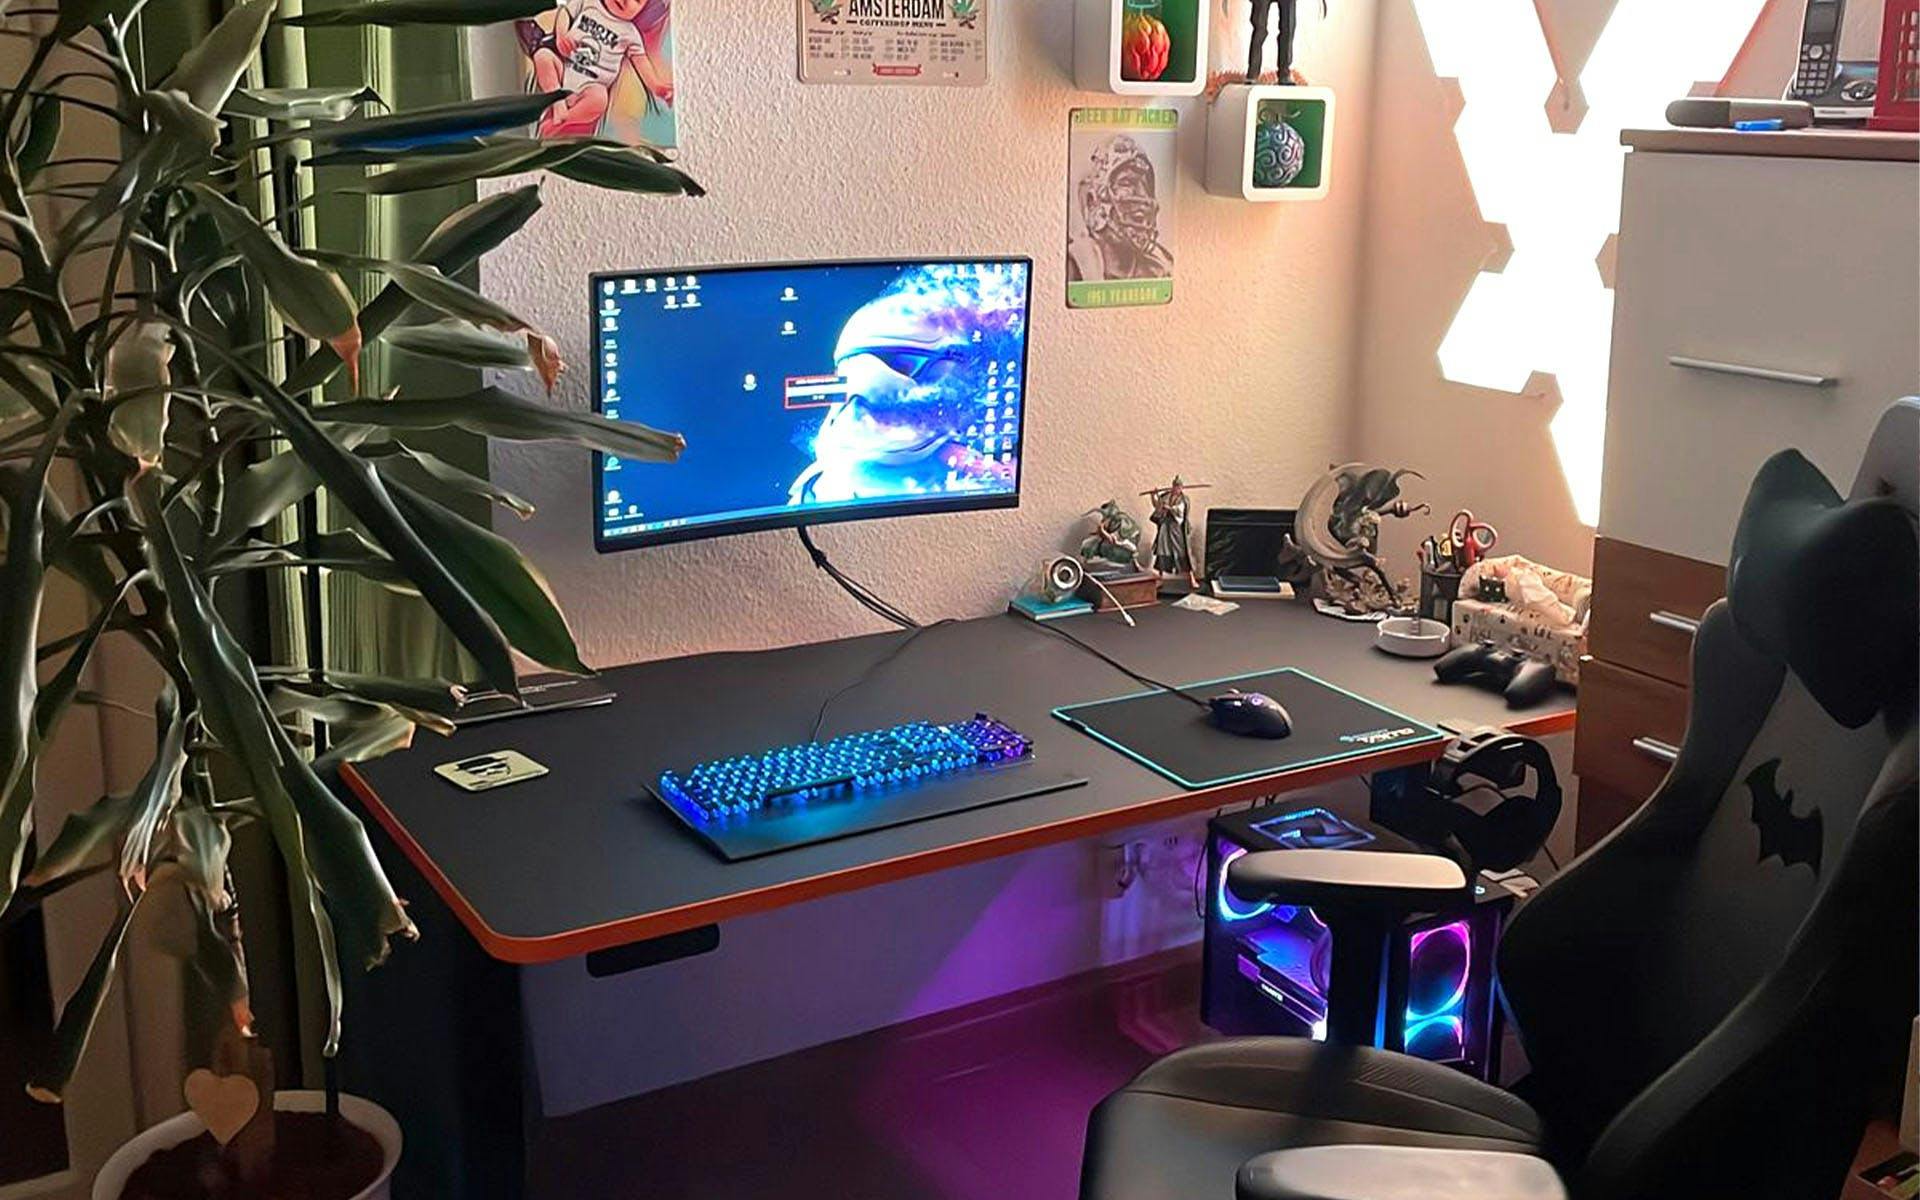 A solid desk is a must for every PC gamer | Credit: LeetDesk (customer)